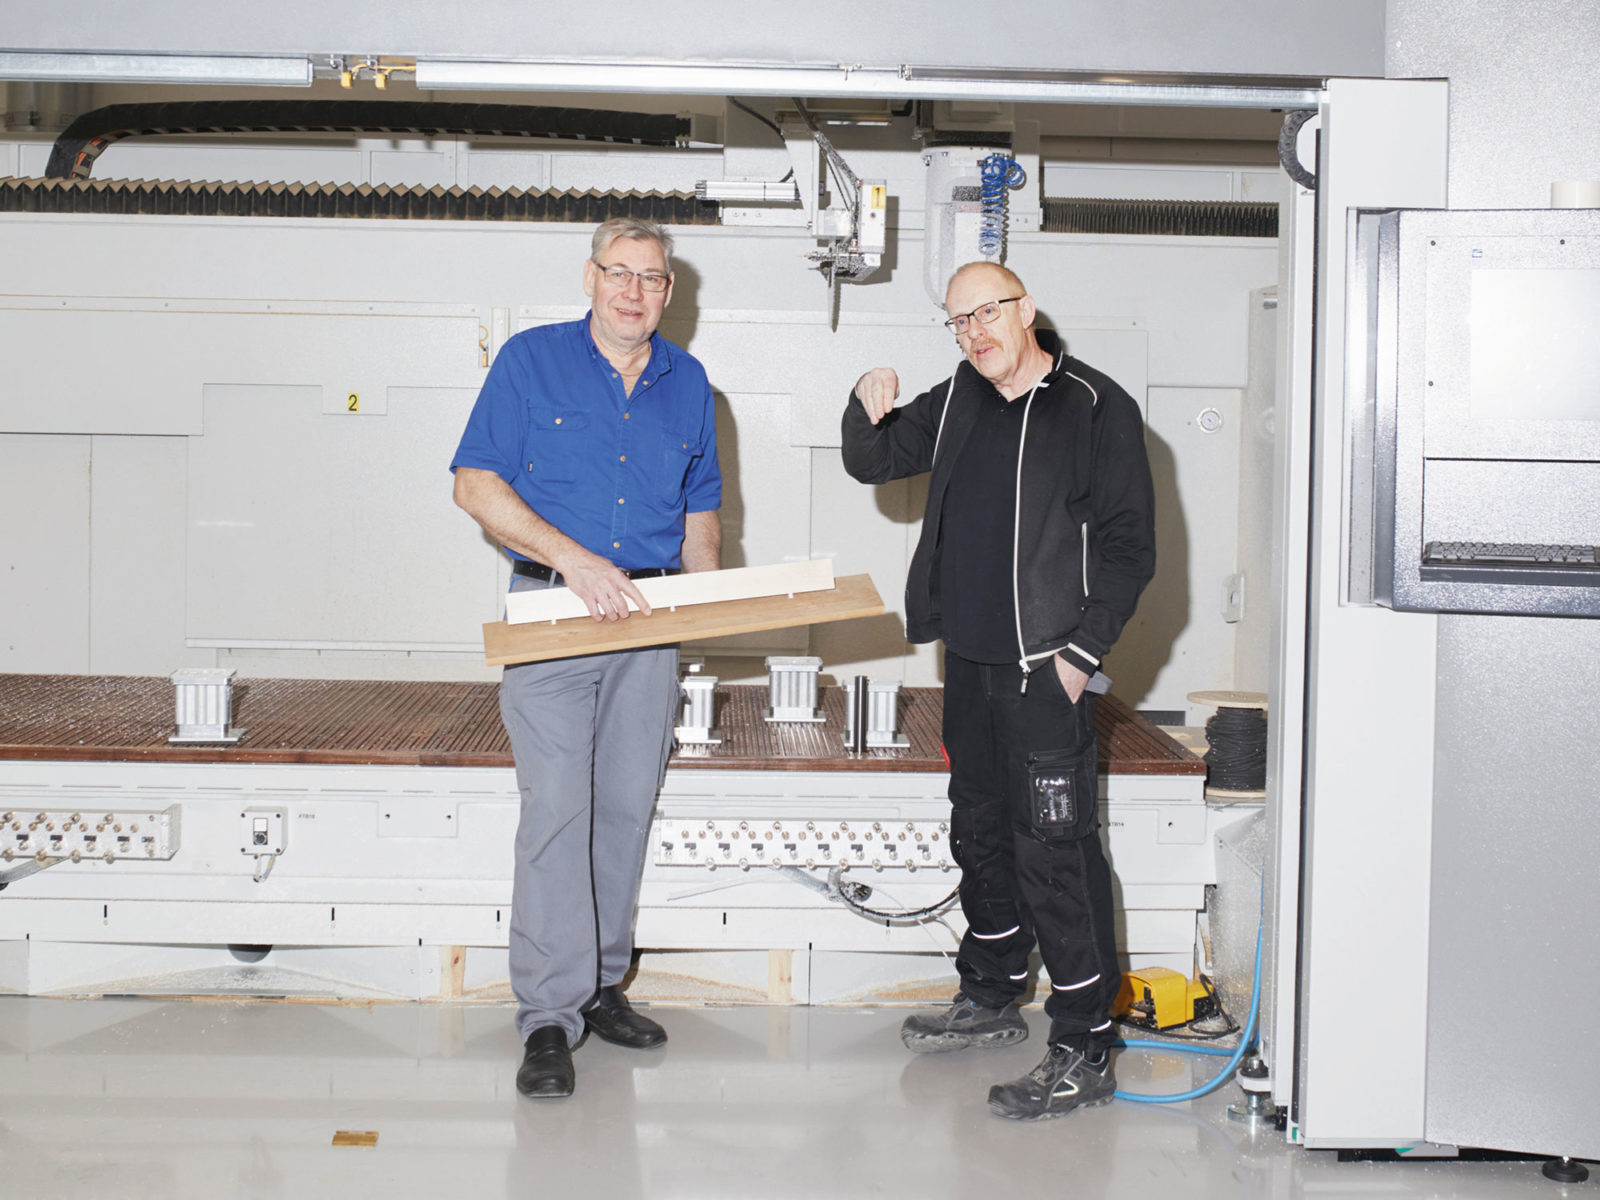 Two middle-aged men, Anders Eriksson and Göran Sjöstedt, standing in a brightly lit clean workshop area.